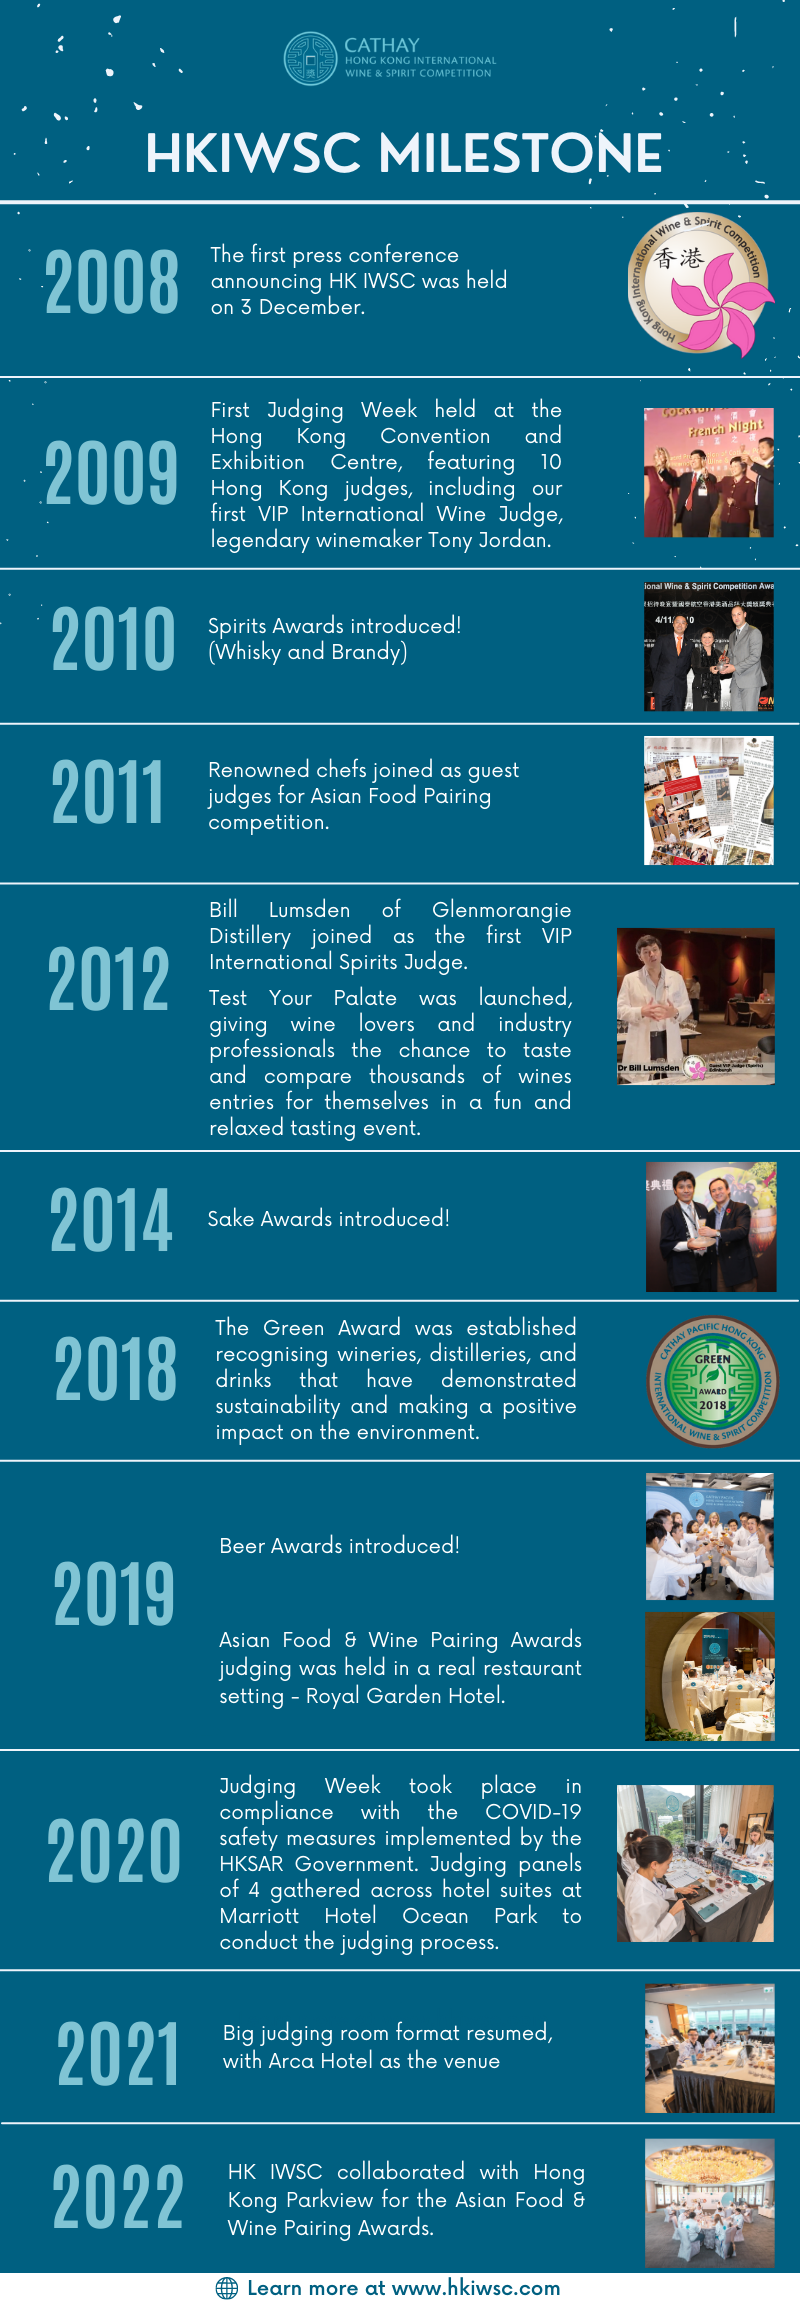 Orange Photo Clean & Corporate Organization History Timeline Infographic (800 × 2500 px) (800 × 2200 px) (800 × 2300 px).png